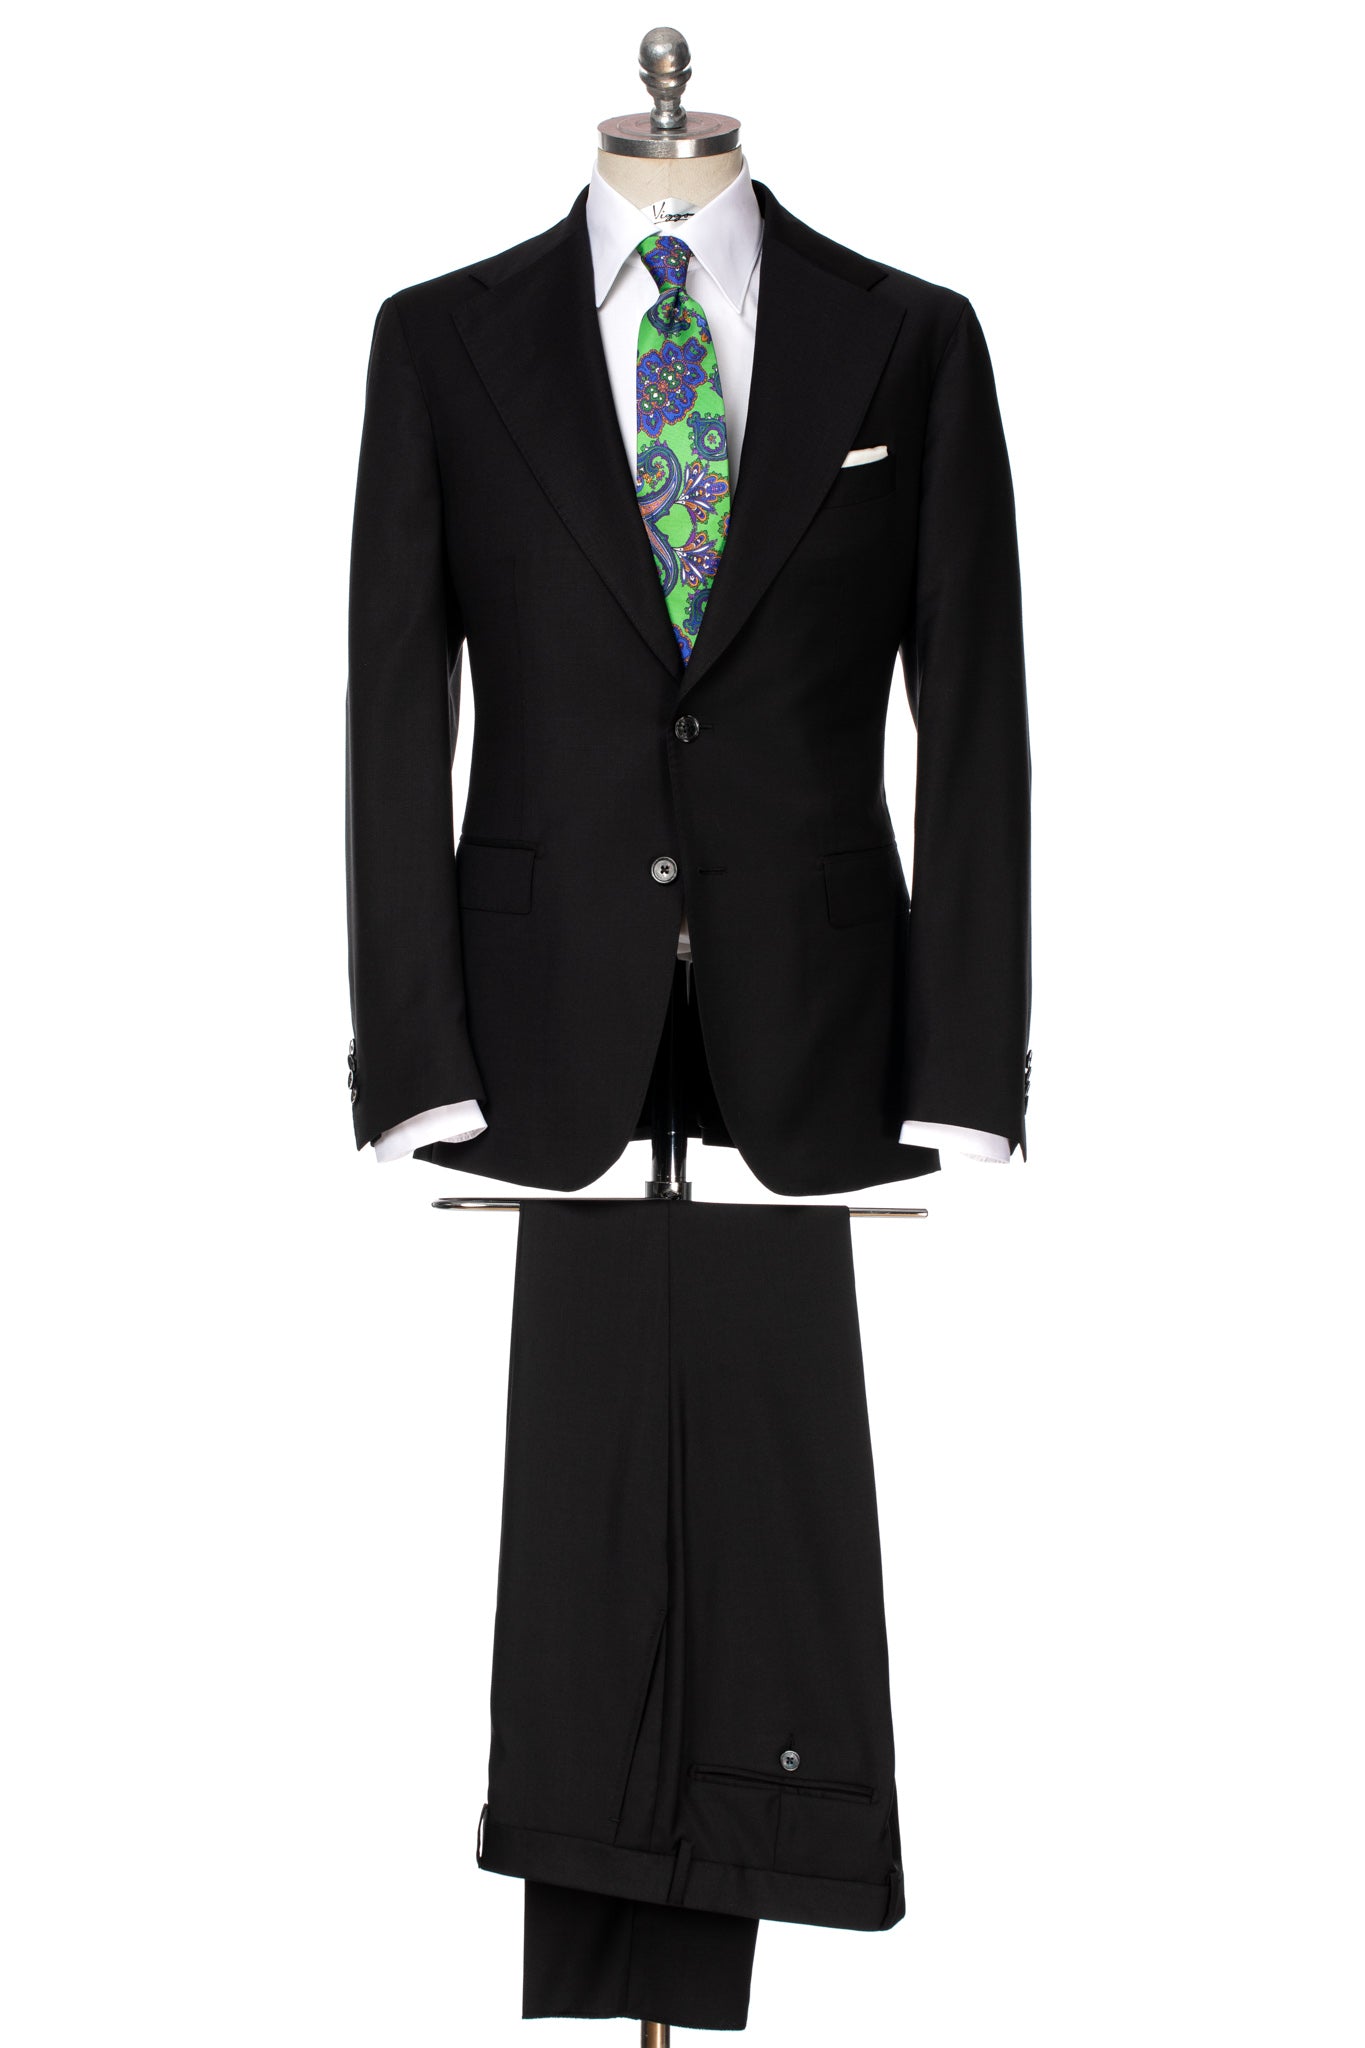 Black two-piece suit, tailored fit